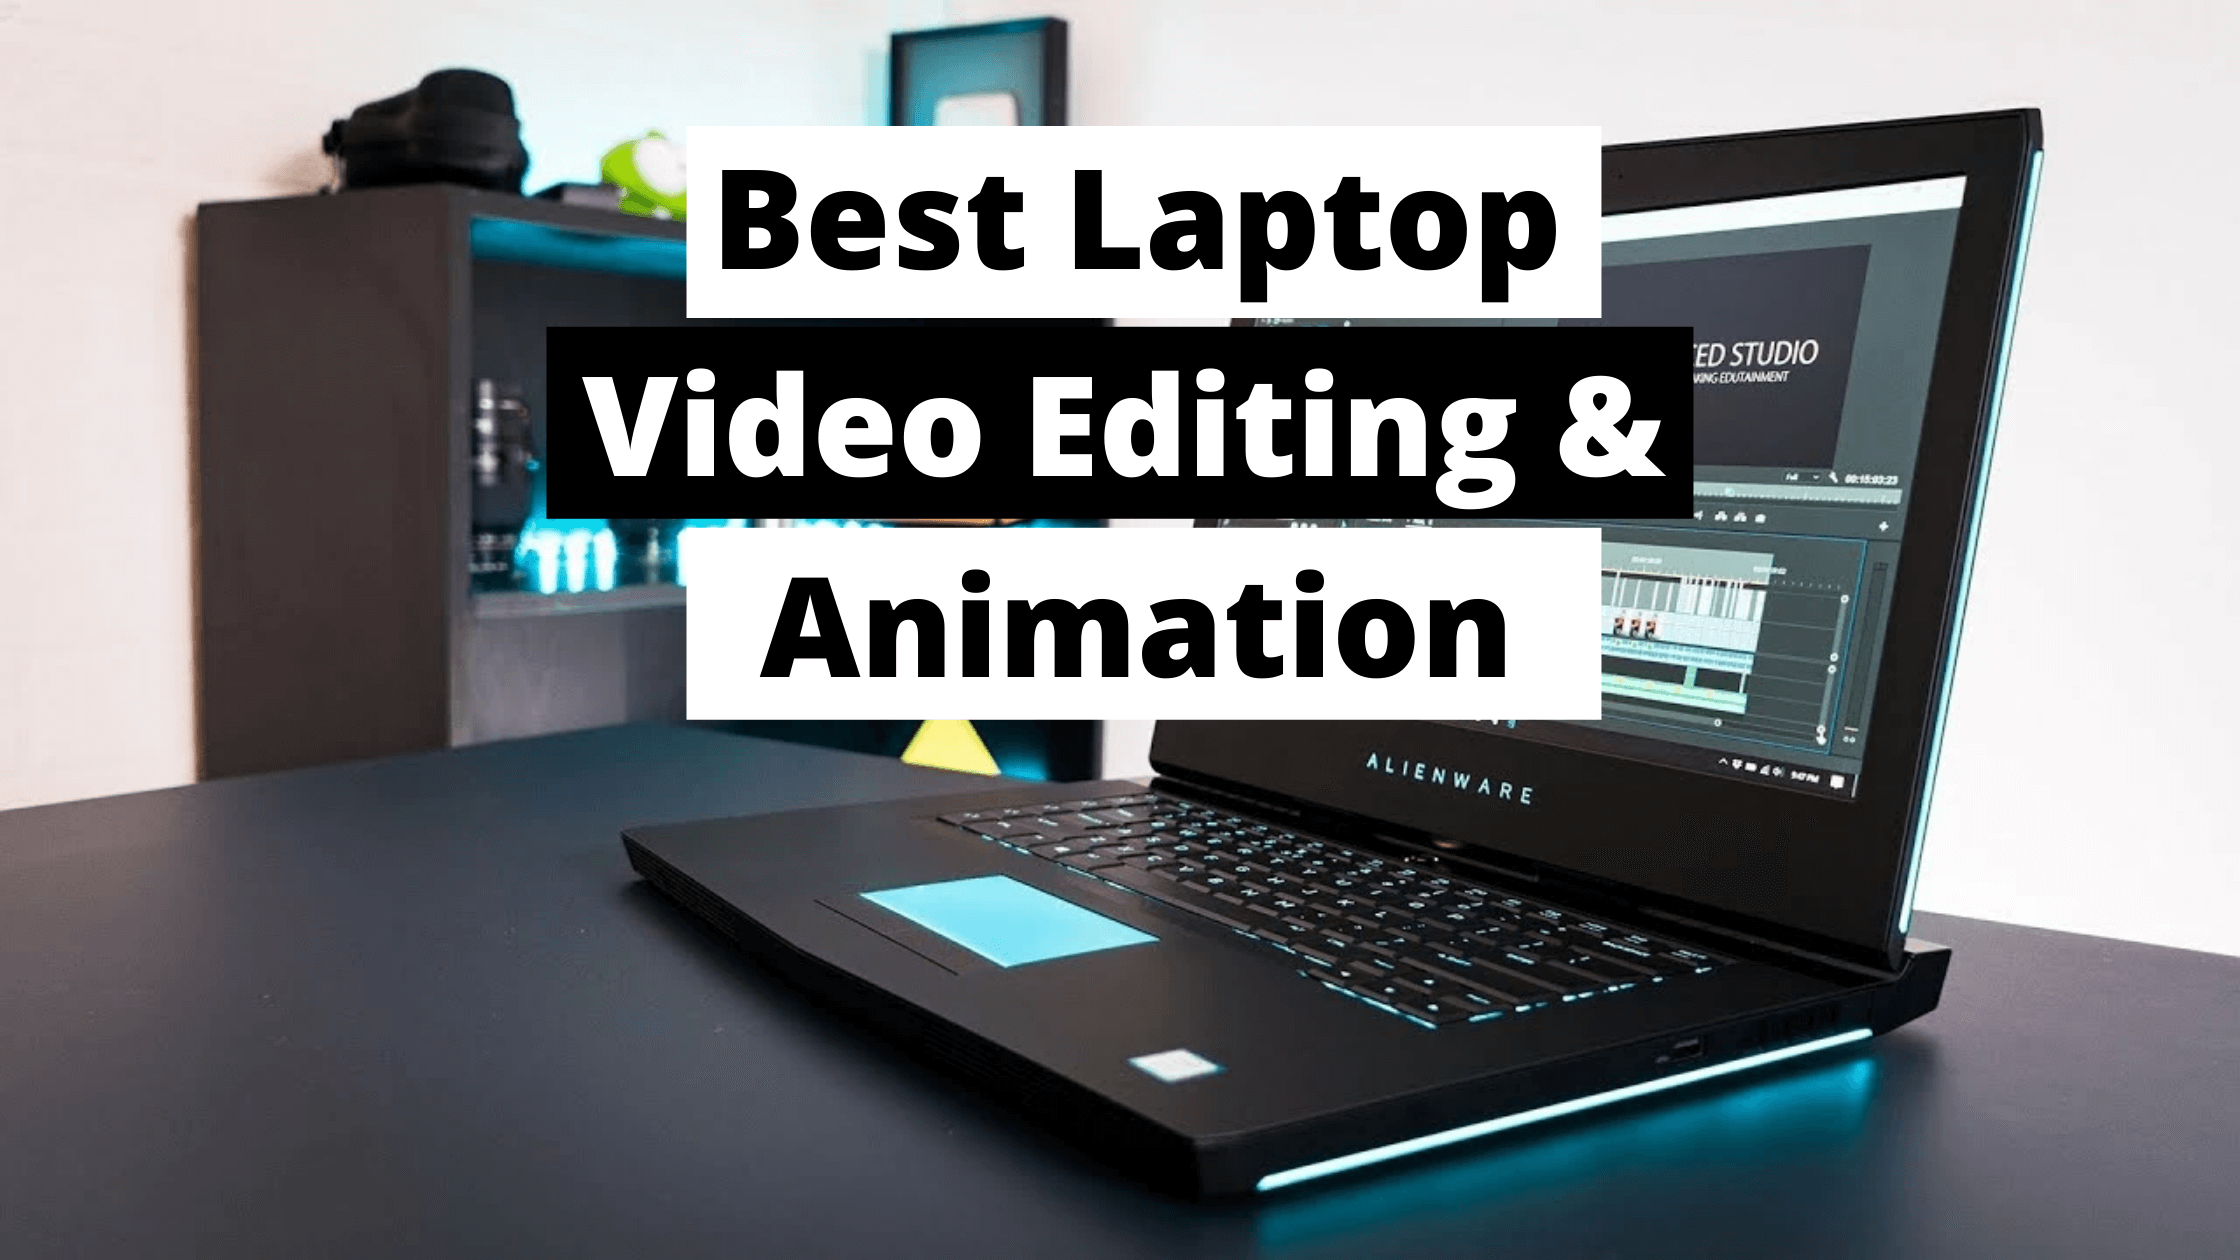 Animation And Video Editing Laptop